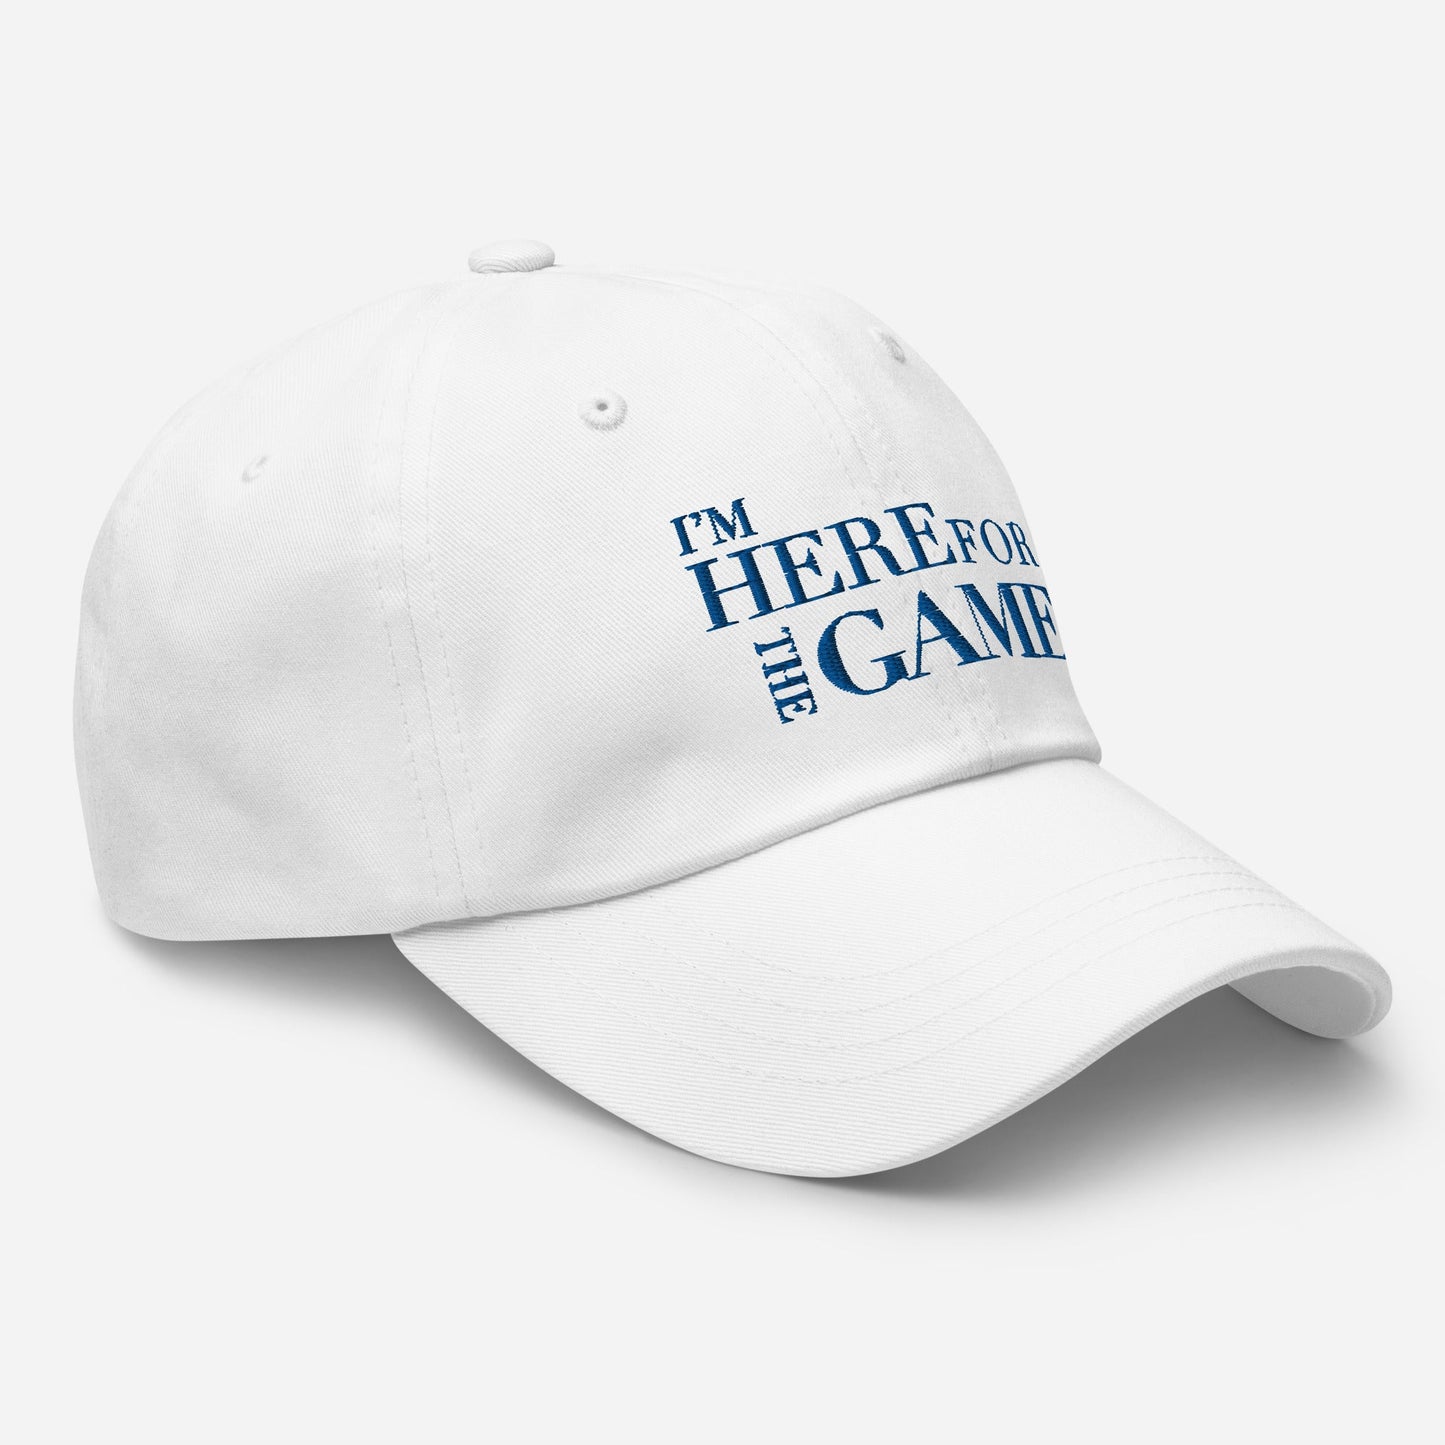 Royal Blue Logo Hat - I’m Here For The Game